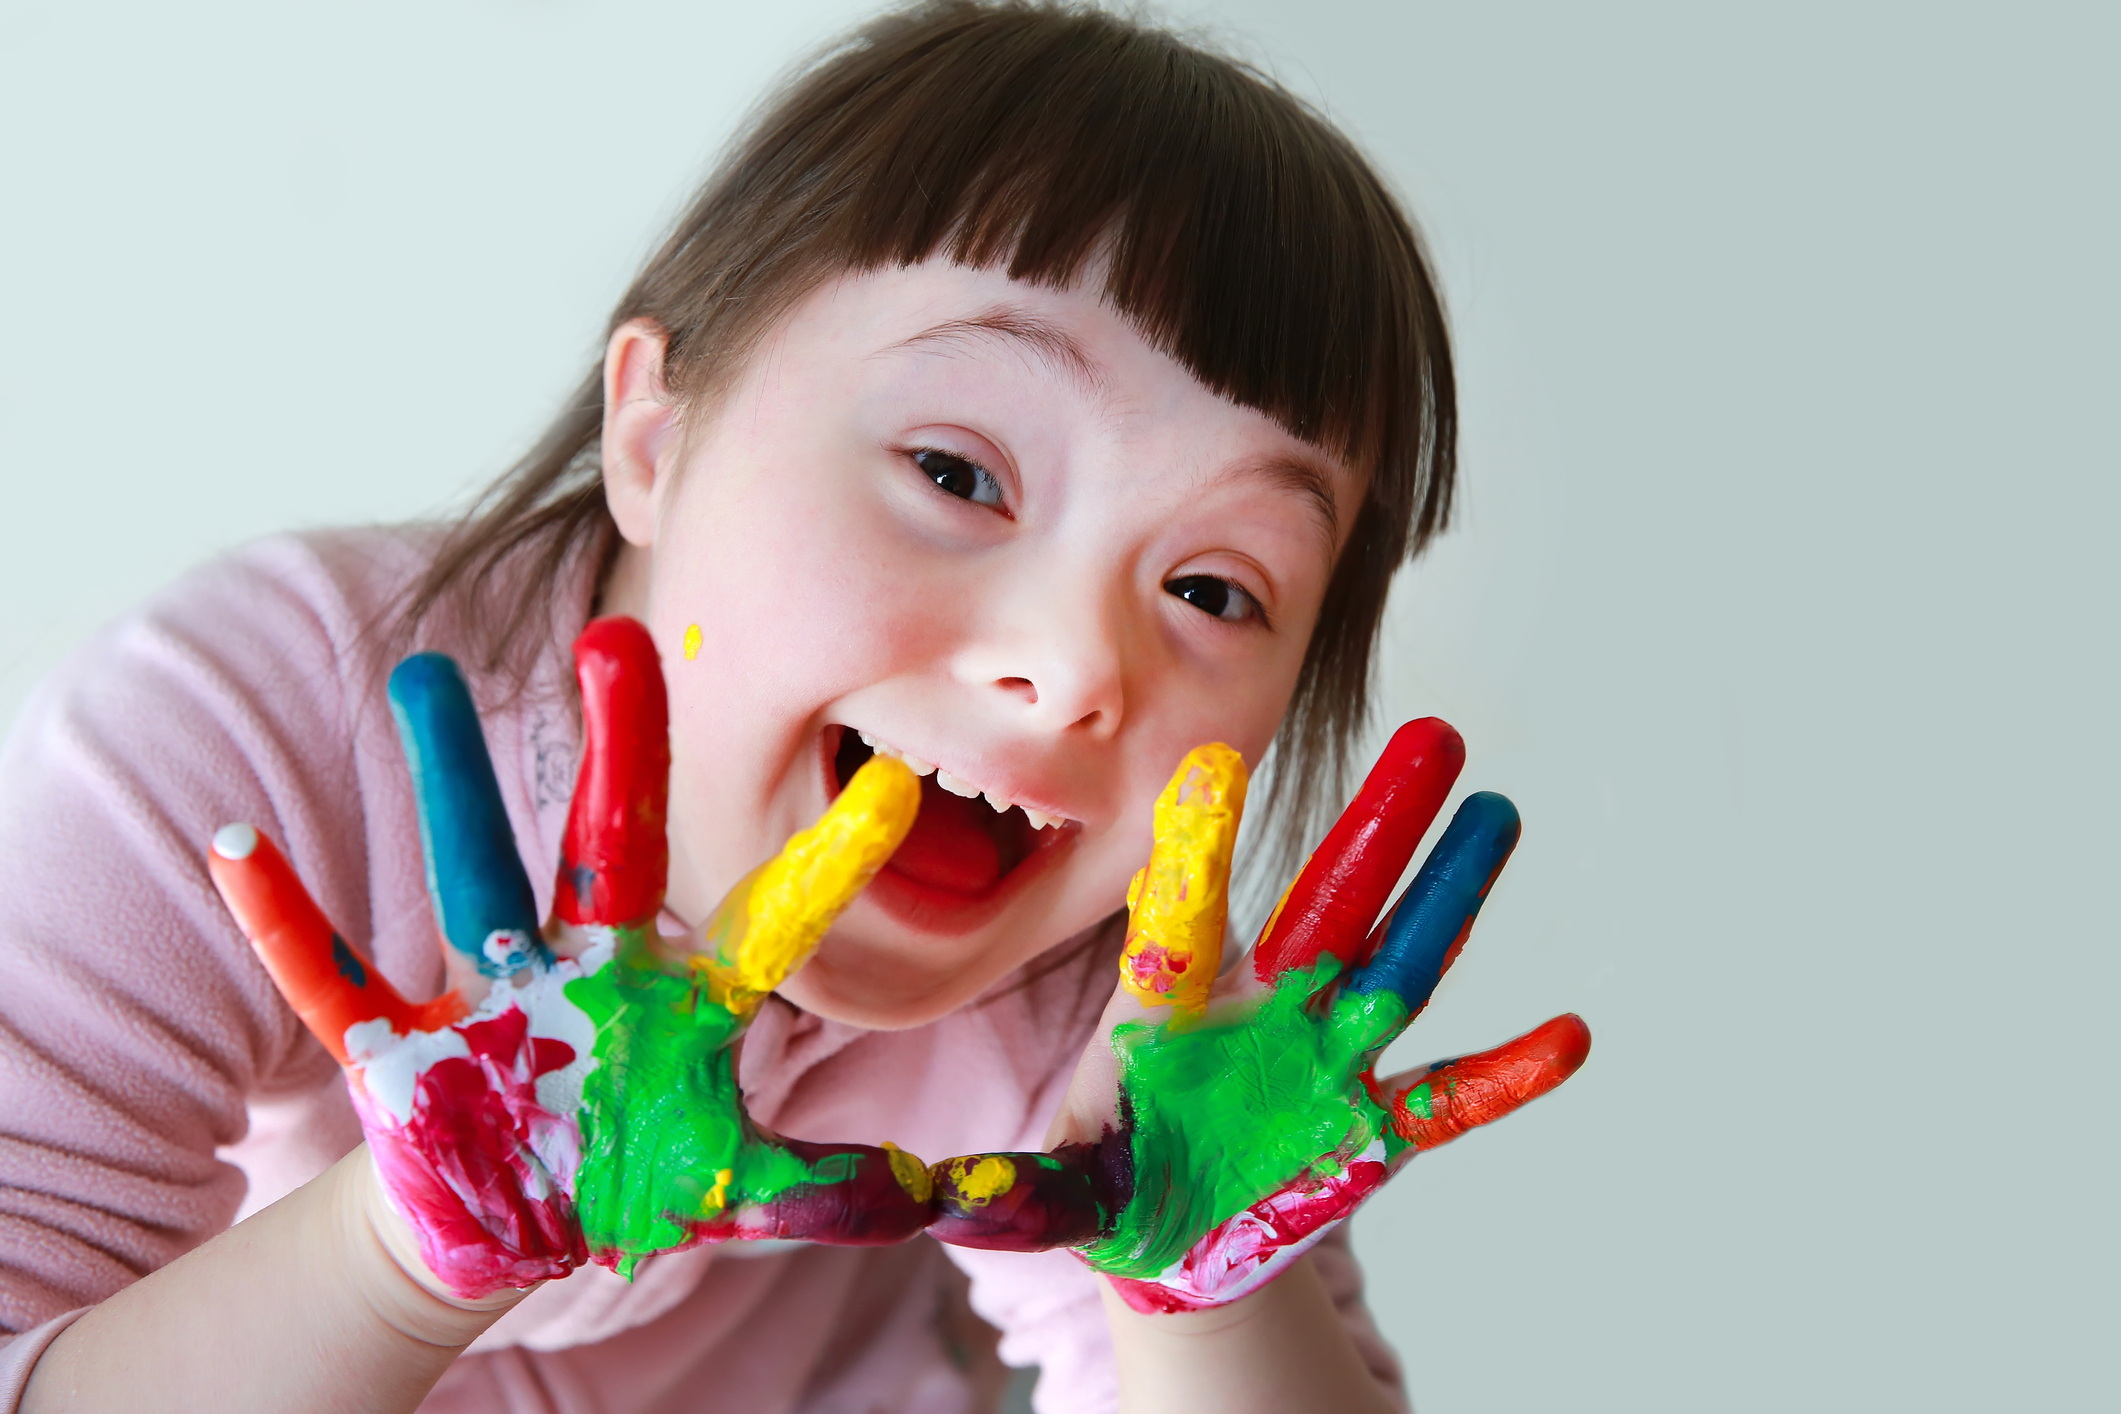 Cute little girl with painted hands. Isolated on grey background.